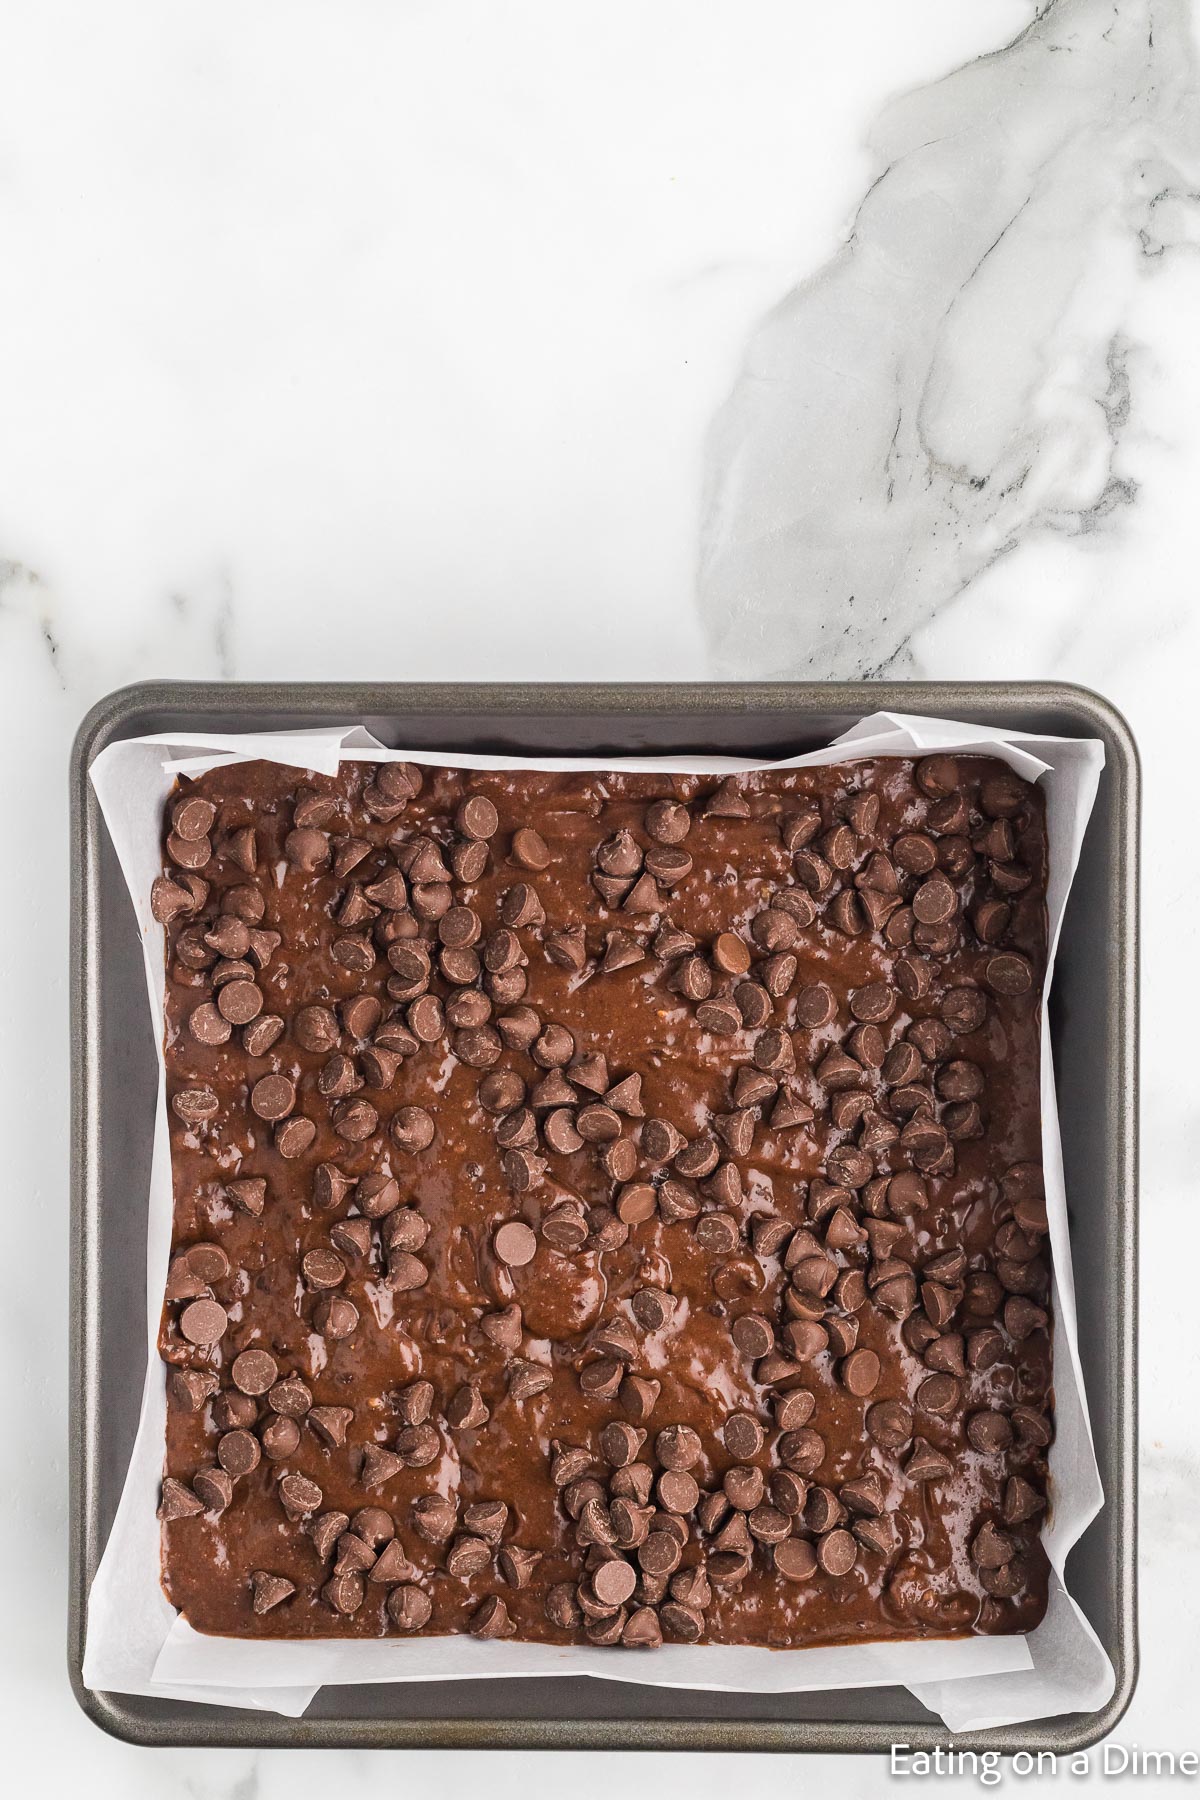 Topping the brownie batter with chocolate chips